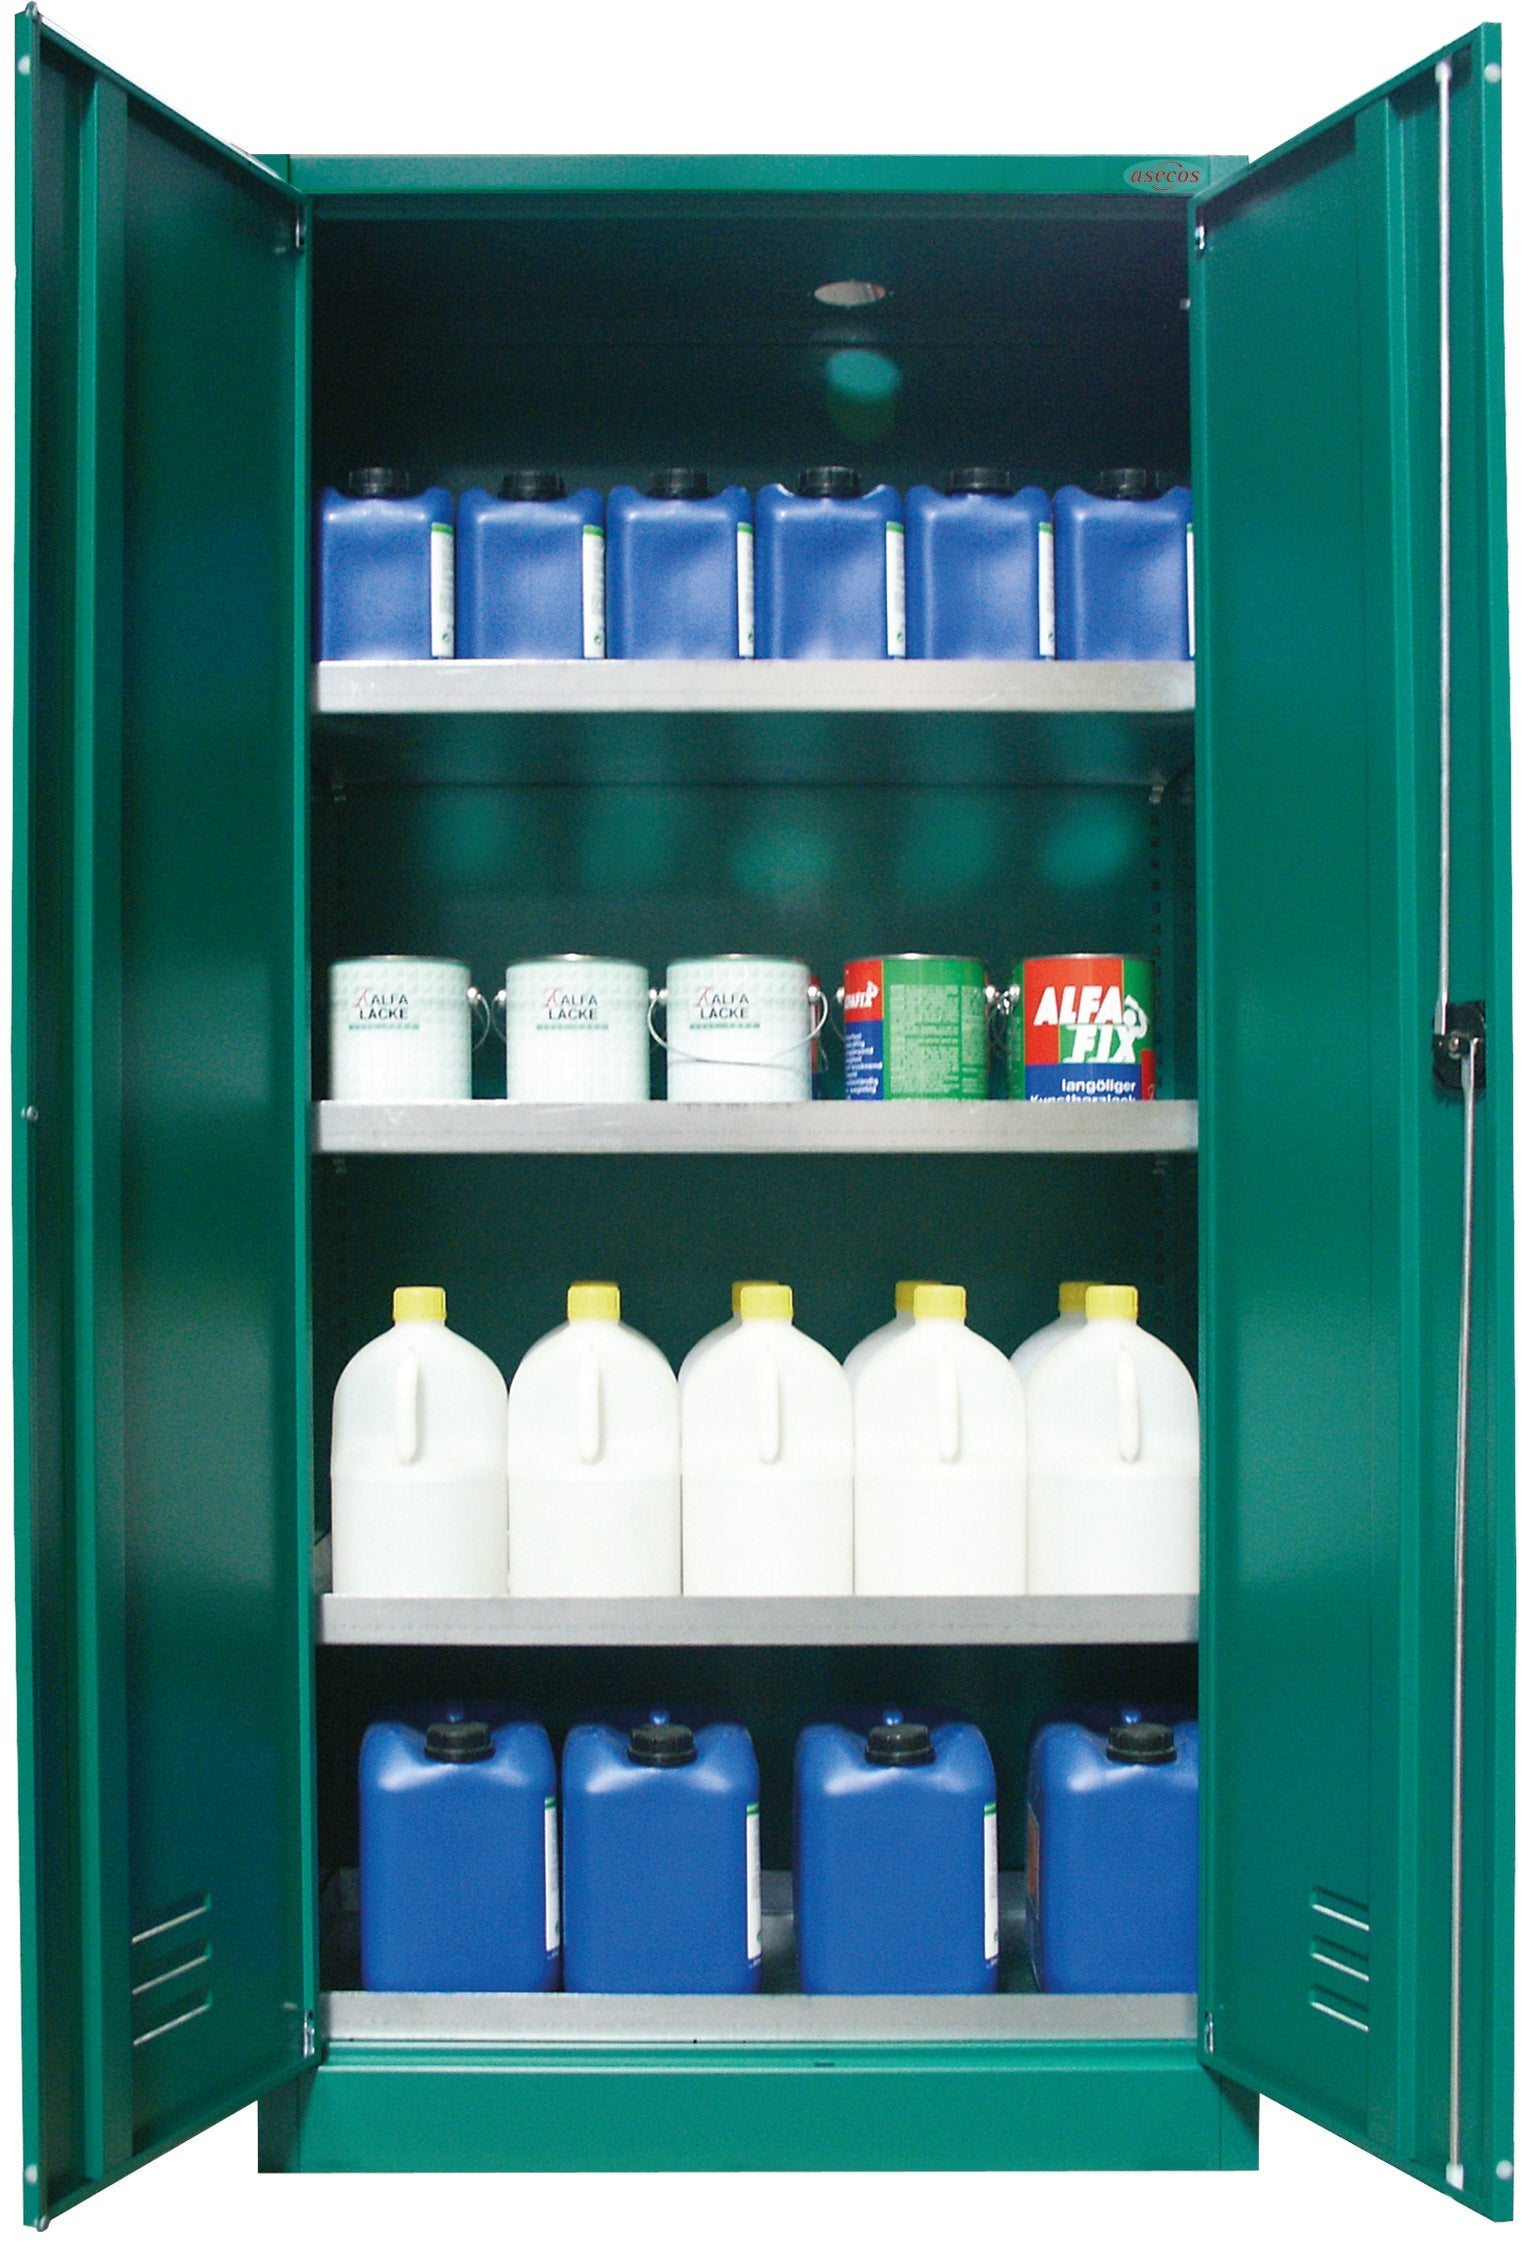 Plant protection product cabinet E-PSM model EP.195.095 (àœHP equipment) in turquoise green RAL 6016 with 3x standard tray base (sheet steel)